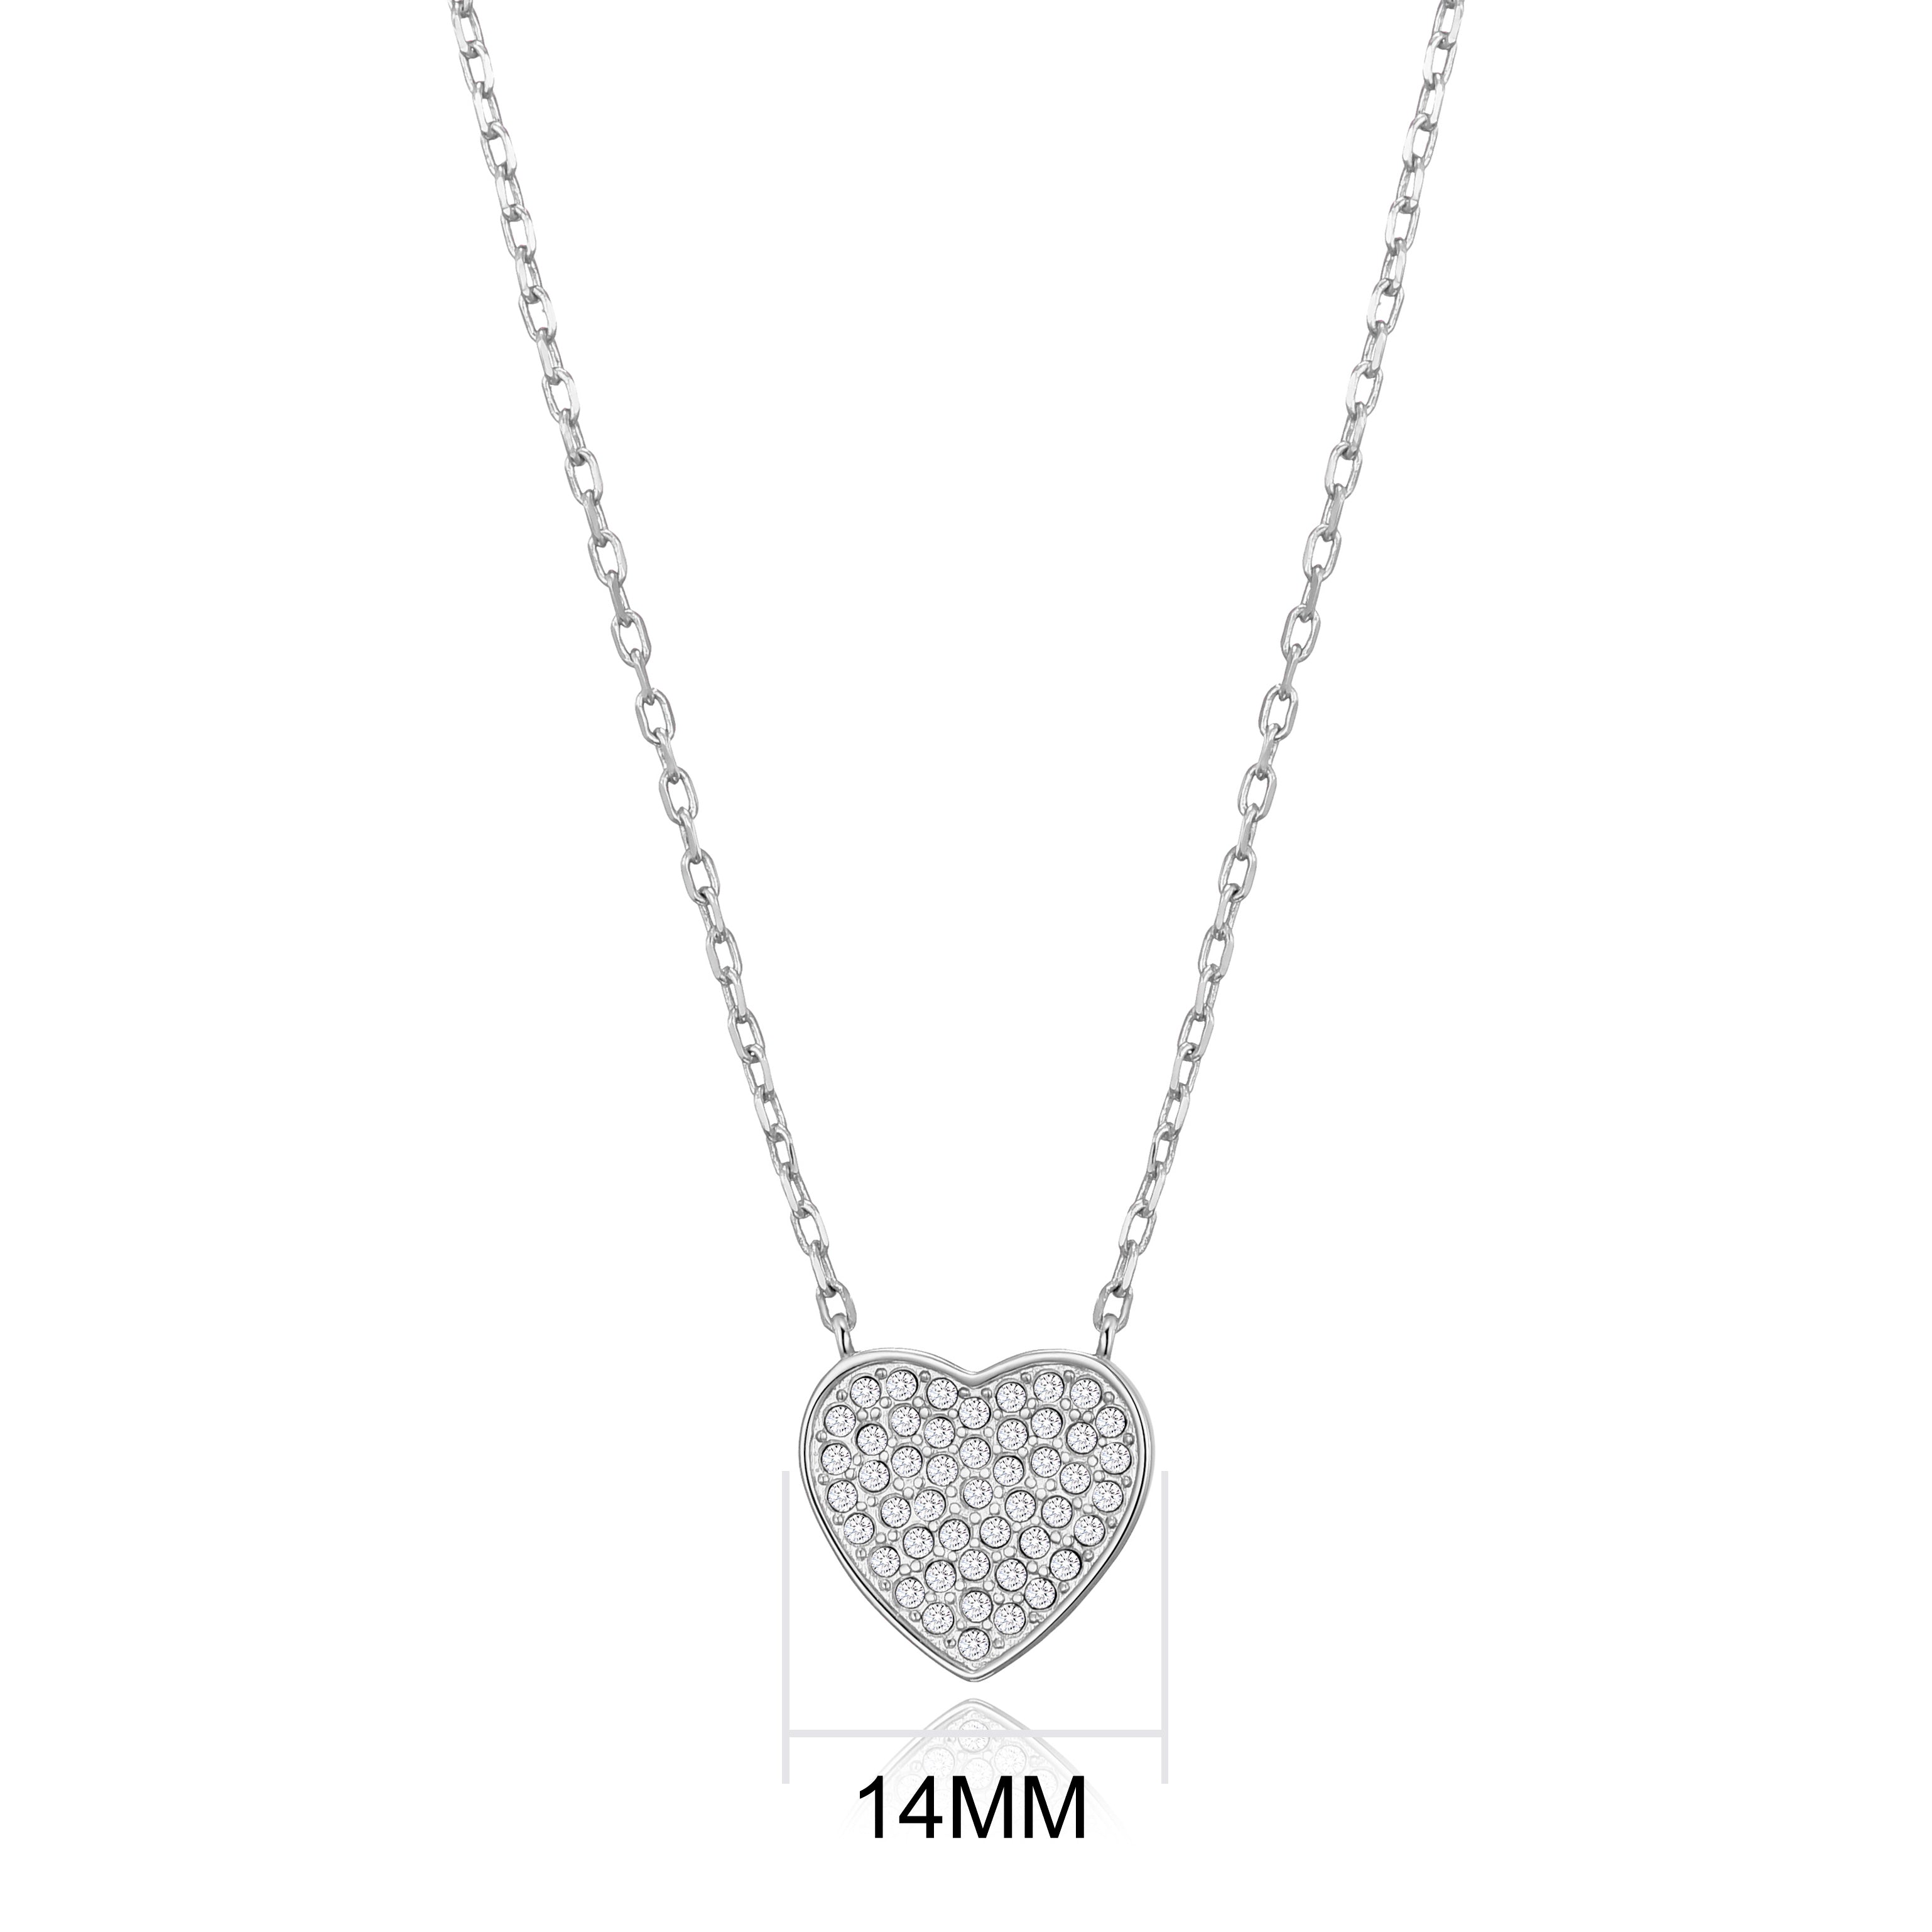 Silver Plated Pave Heart Necklace Created with Zircondia® Crystals